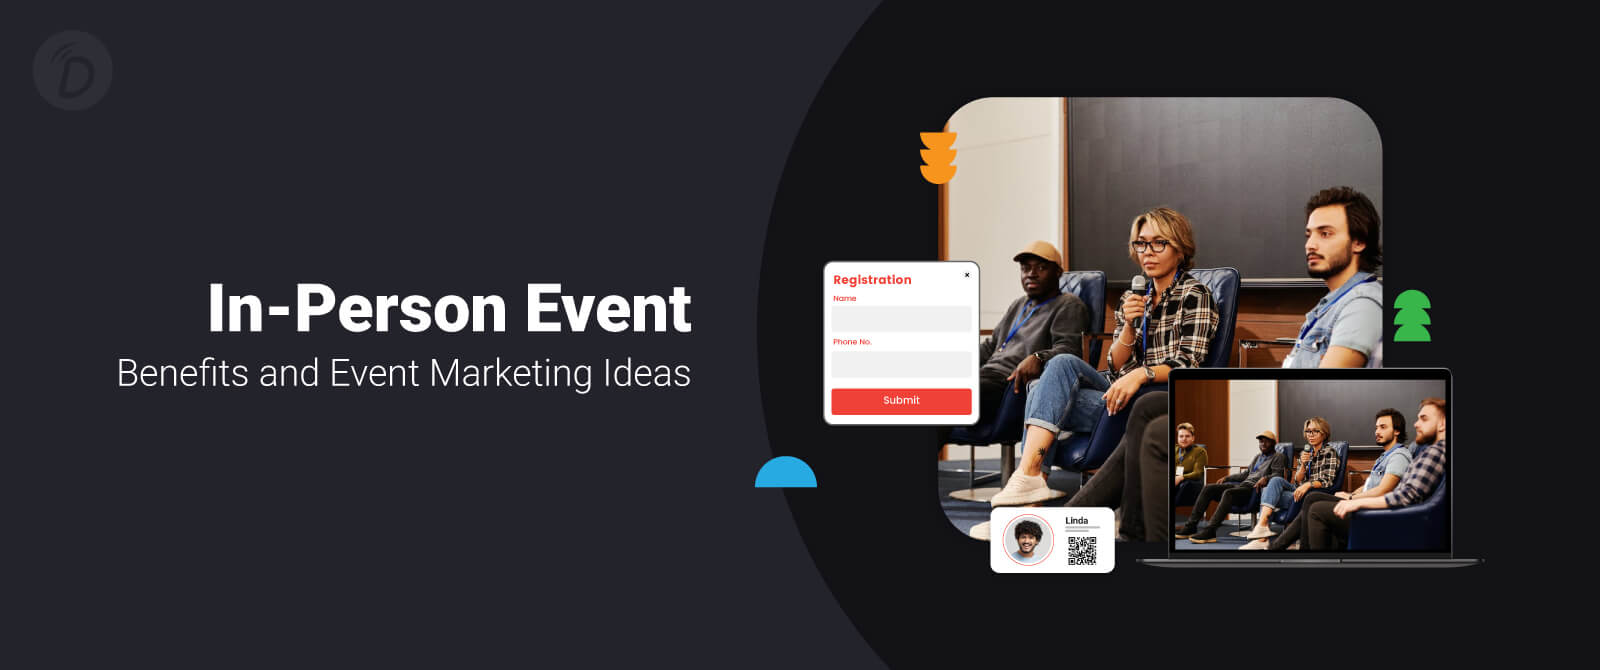 In-Person Event: Benefits and Event Marketing Ideas